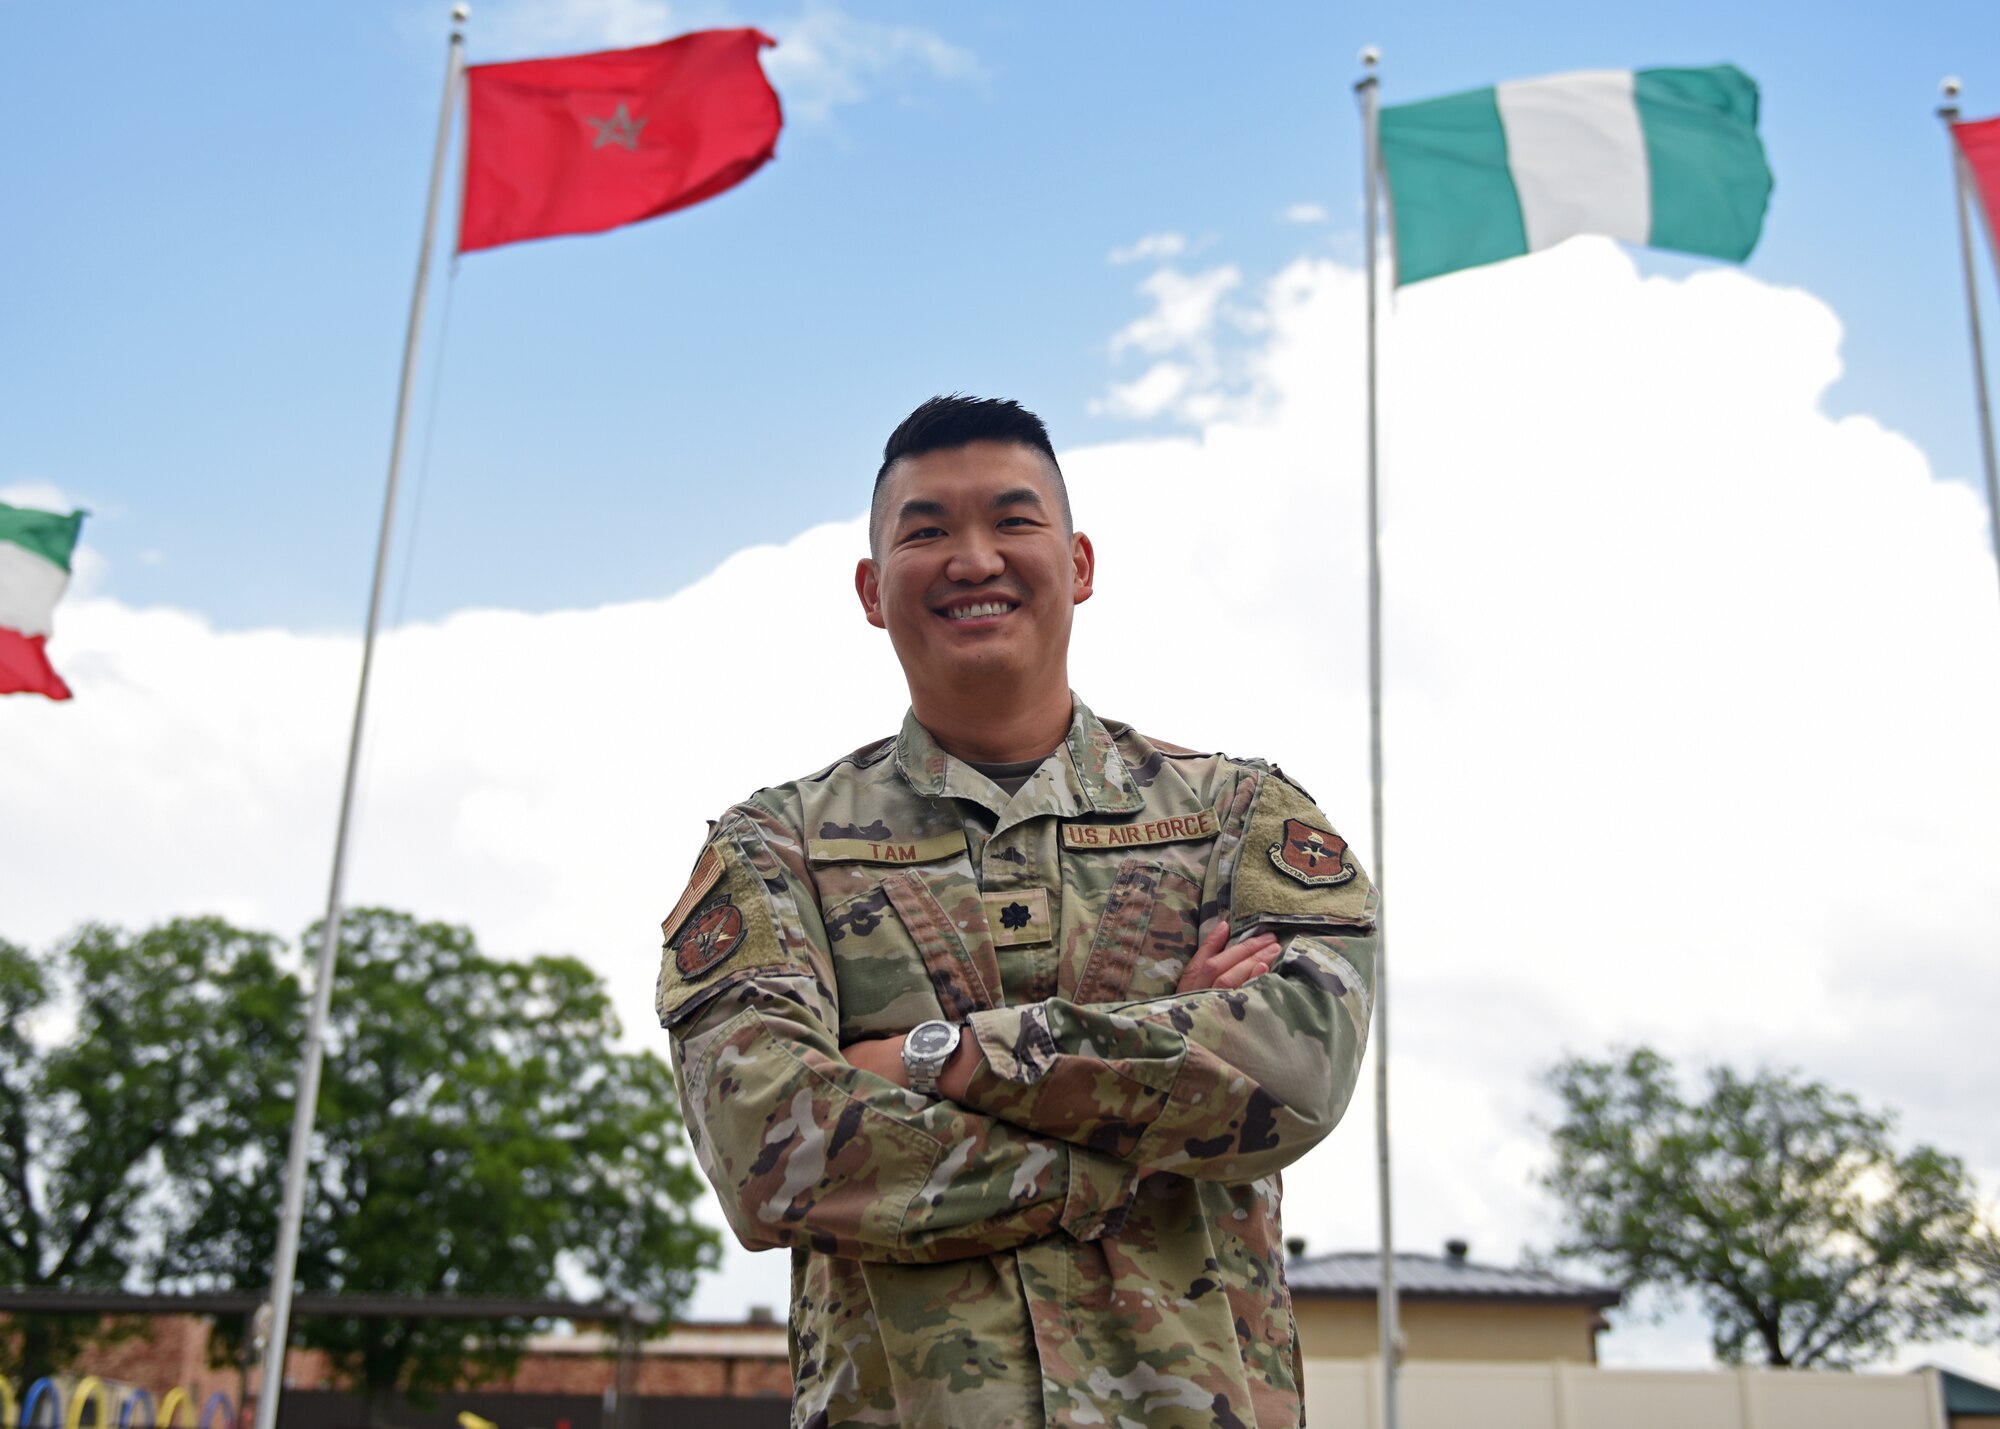 U.S. Air Force Lt. Col. Chin Tam, 313th Training Squadron director of operations, poses for a photo at Goodfellow Air Force Base, Texas, May 24, 2022. Tam is a first-generation Chinese American and was born in Hong Kong. (U.S. Air Force photo by Senior Airman Ethan Sherwood)